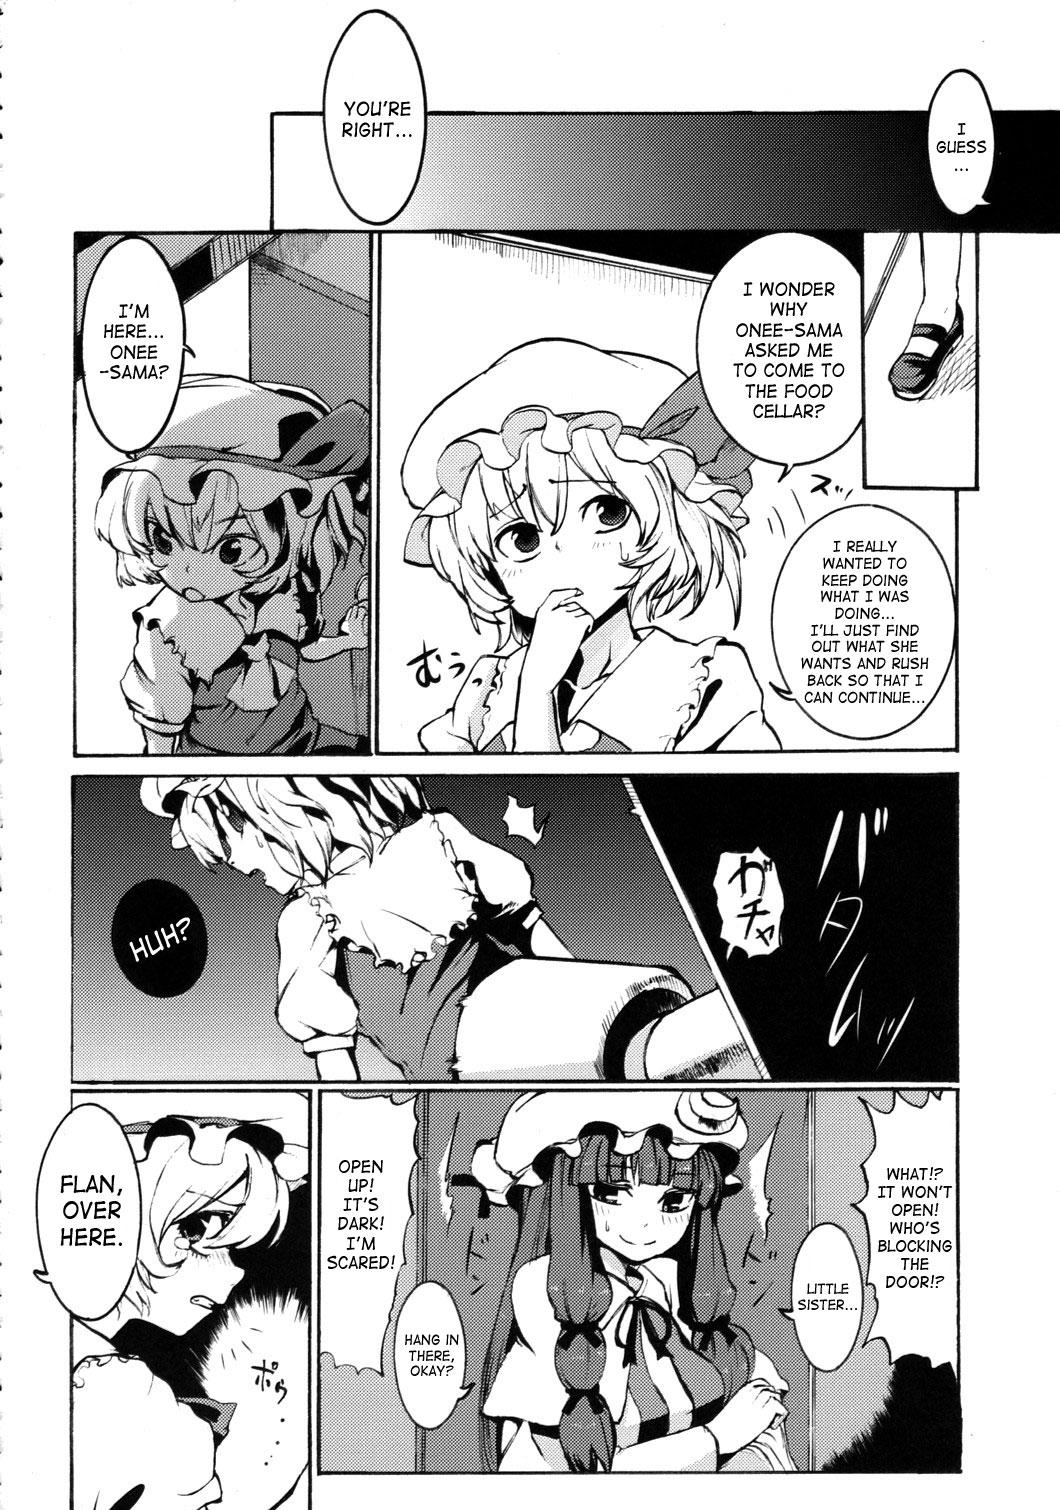 Tiny NOBLE MATERIAL - Touhou project Erotica - Page 7